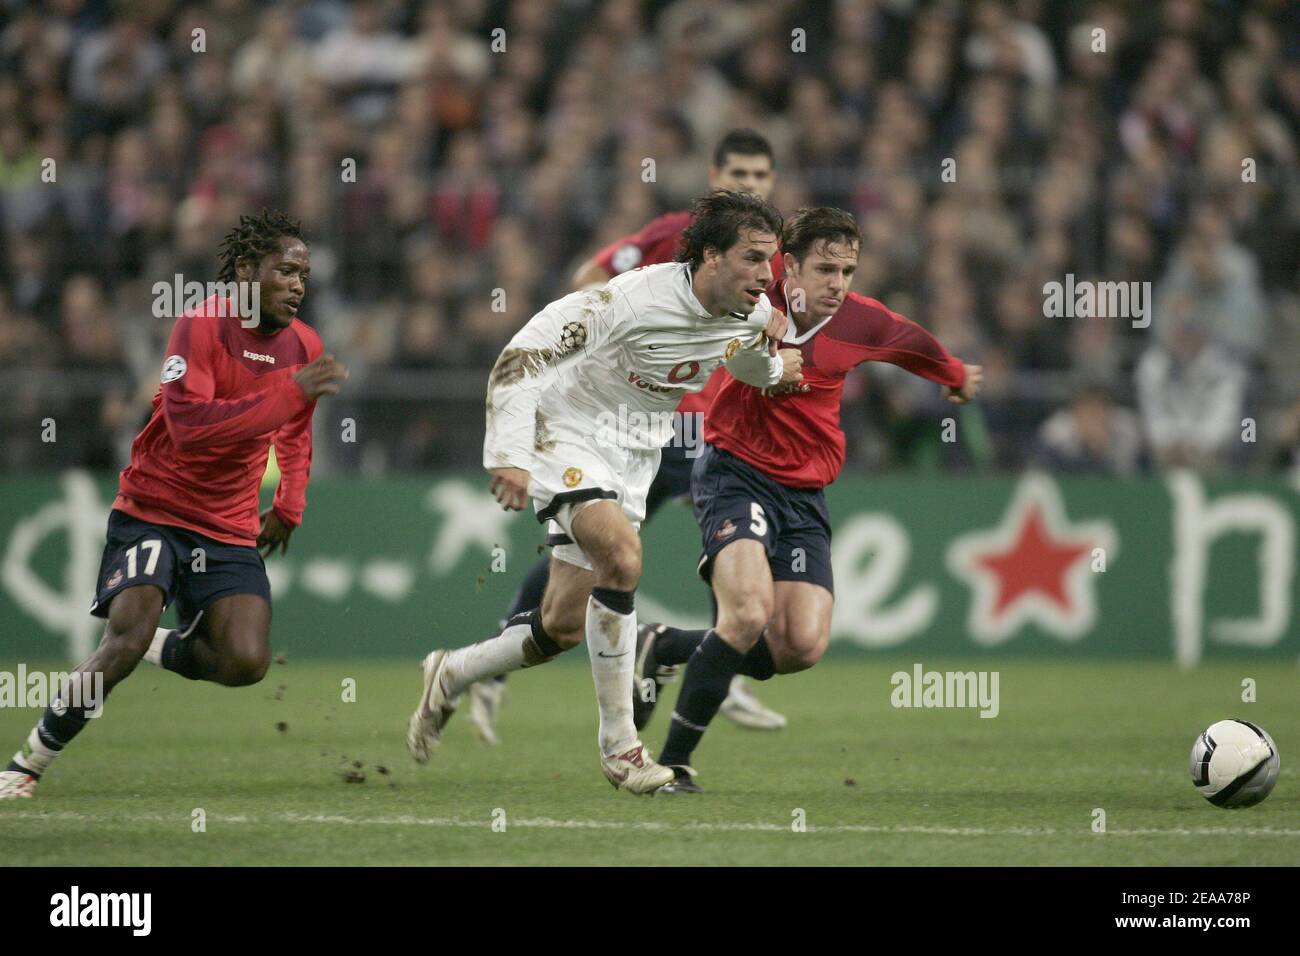 Manchester's Ruud Van Nistelrooy clears the ball under pressure from Lille's Jean Makoun(l) and Rafael (r) during the UEFA Champions League, Lille vs Manchester, in Saint-Denis near Paris, France, on November 2, 2005. Lille won 1-0. Photo by Laurent Zabulon/ABACAPRESS.COM Stock Photo